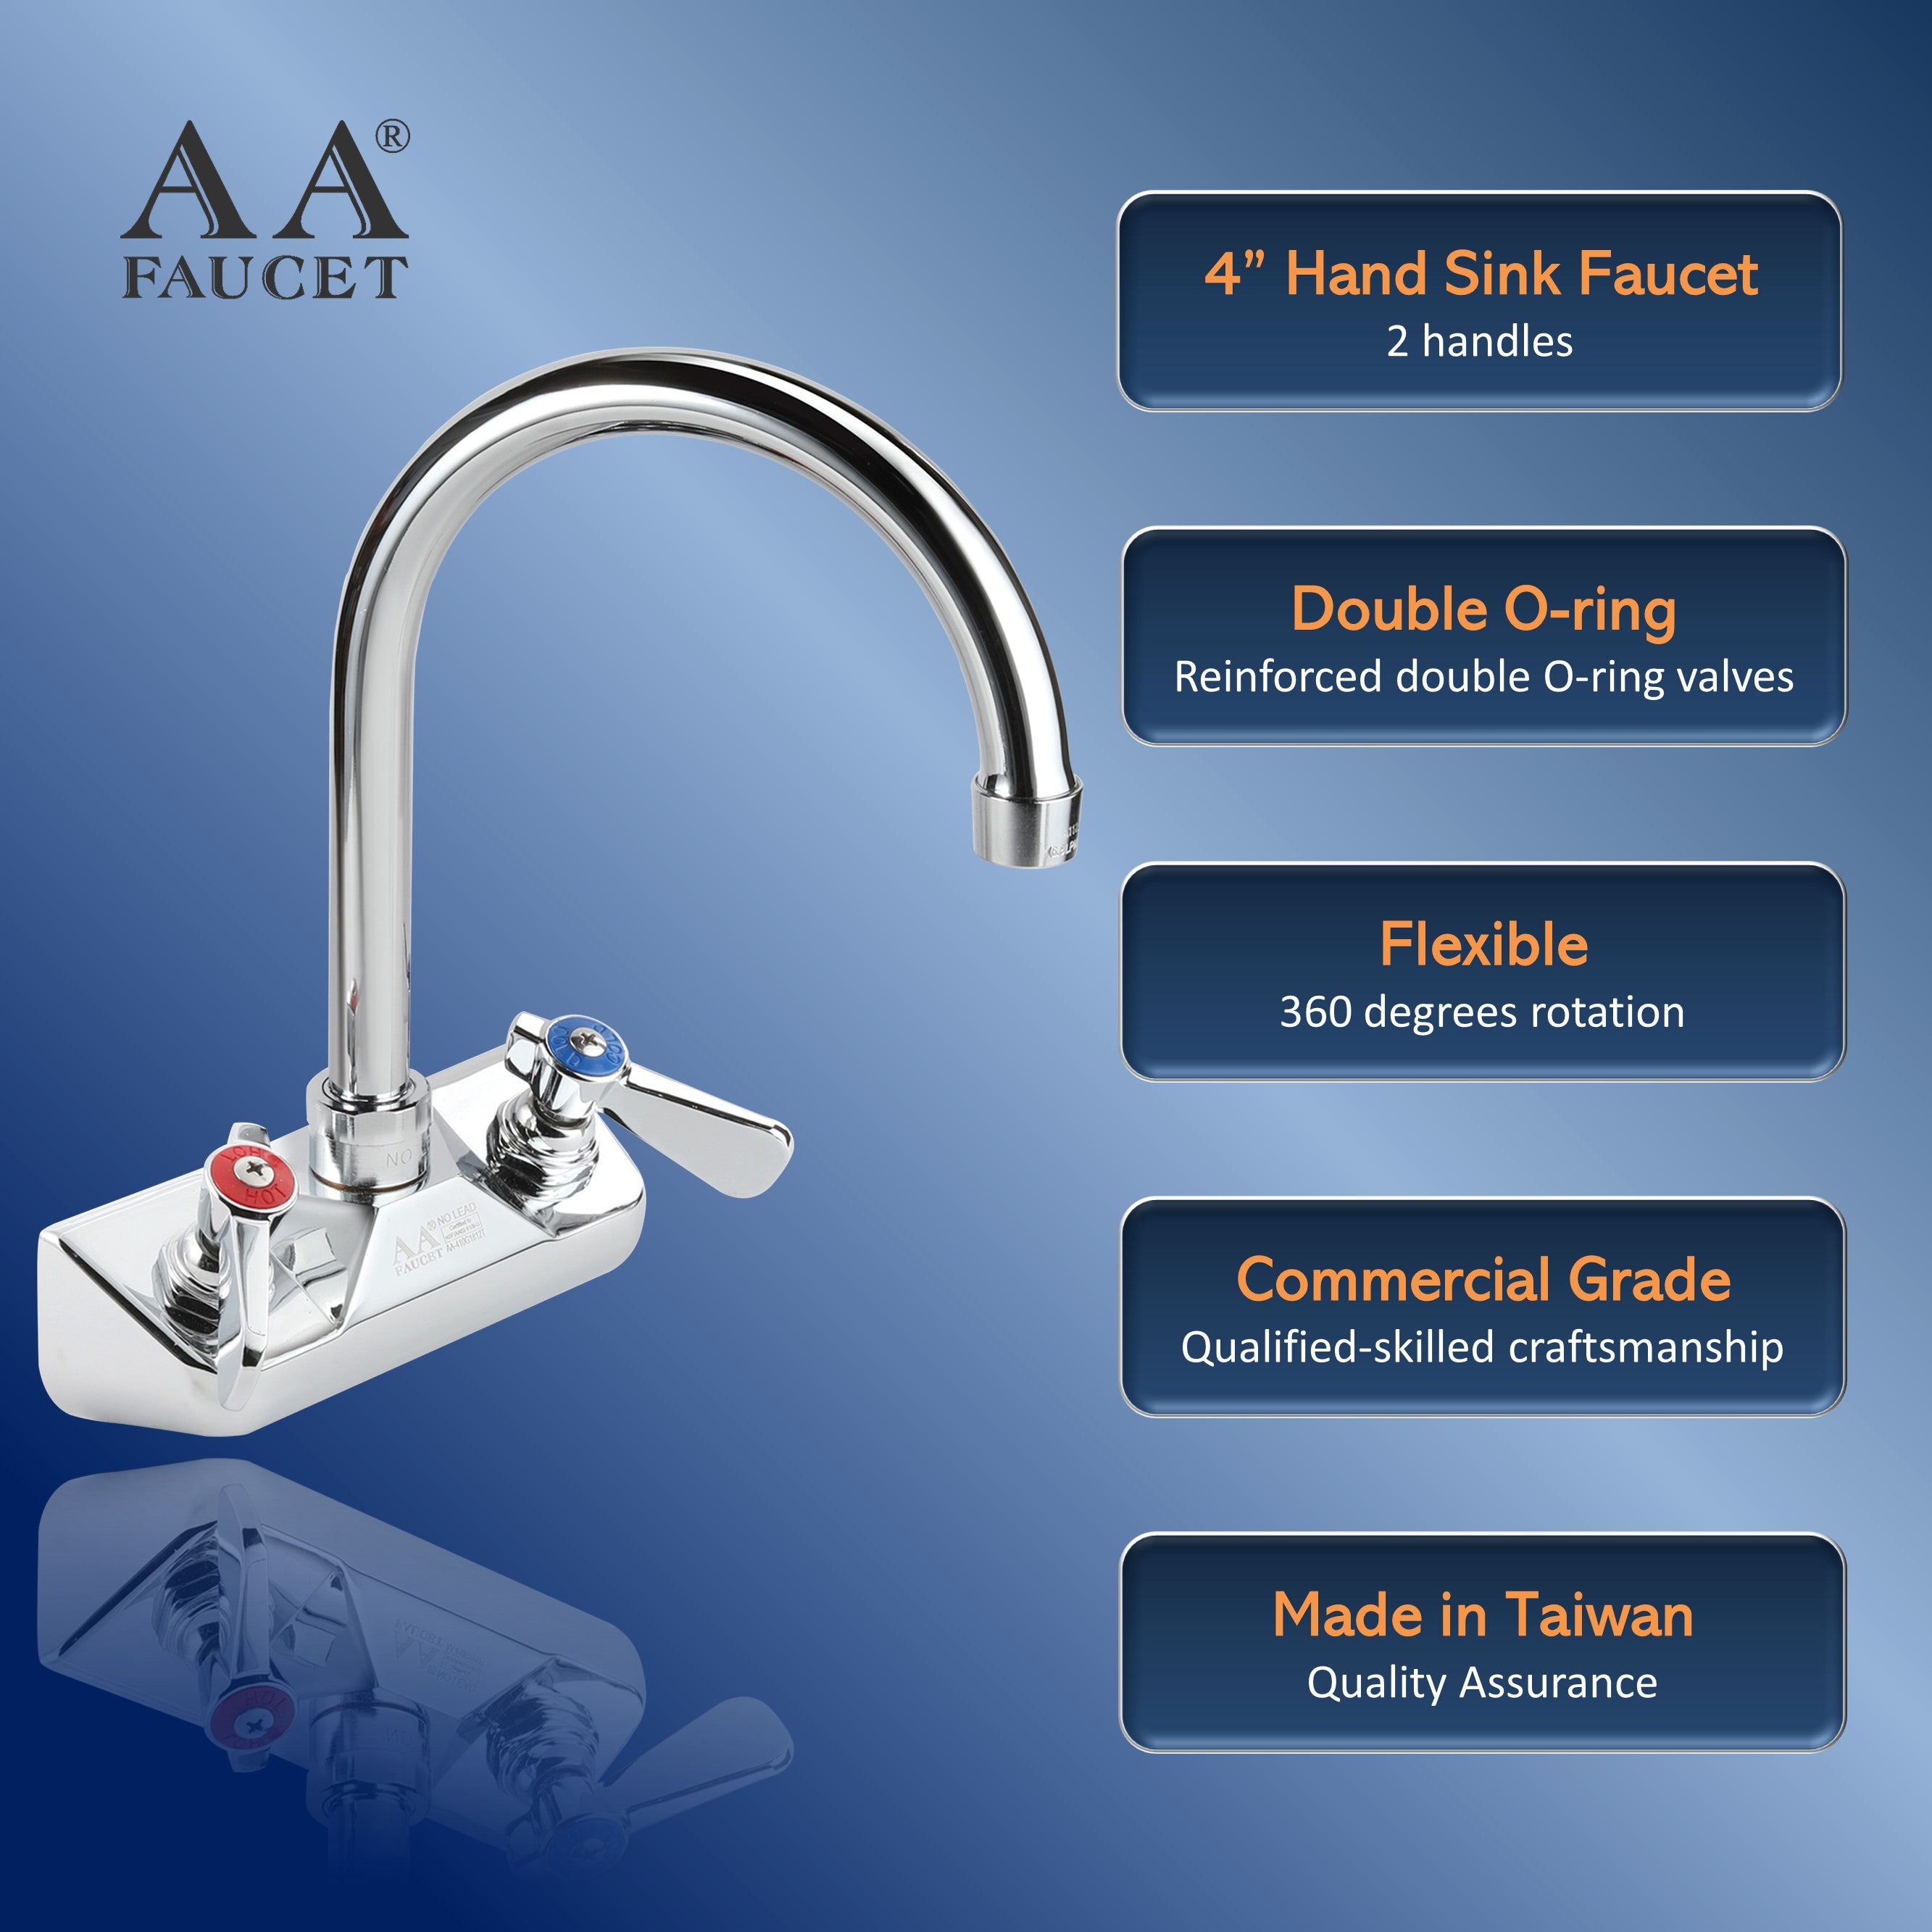 AA Faucet 4" Wall Mount Commercial Hand Sink Faucet with 6" Gooseneck Spout, Brass Construction Chrome Polished for Restaurant Kitchen NSF Approved